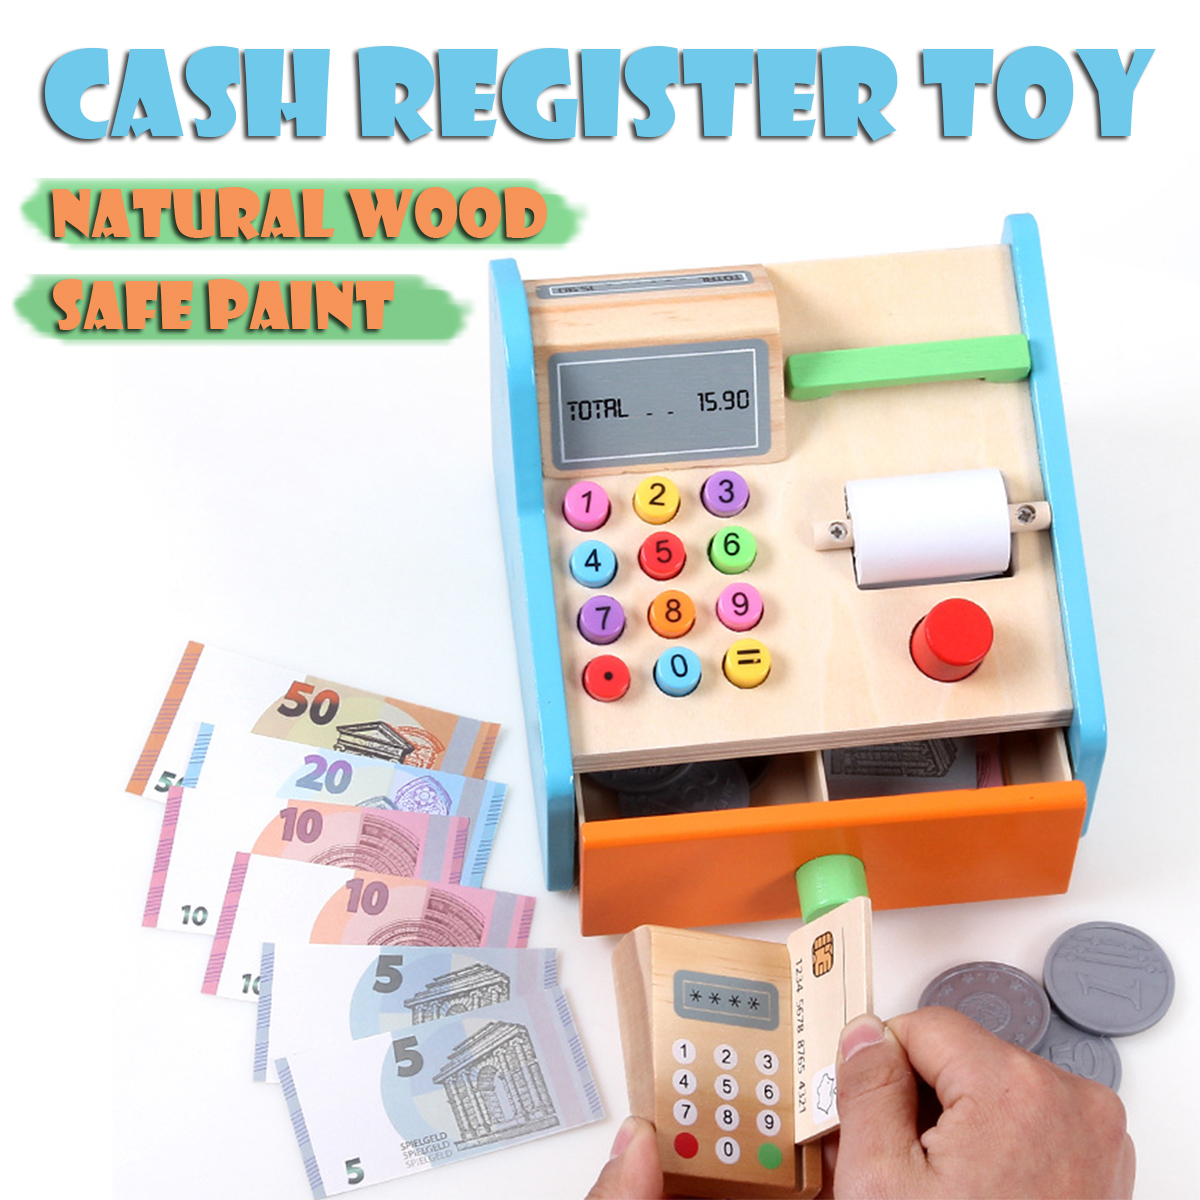 Wooden-Cash-Register-Shop-Grocery-Checkout-Play-Game-Learn-Education-Toys-for-Kids-Perfect-Gift-1685525-1